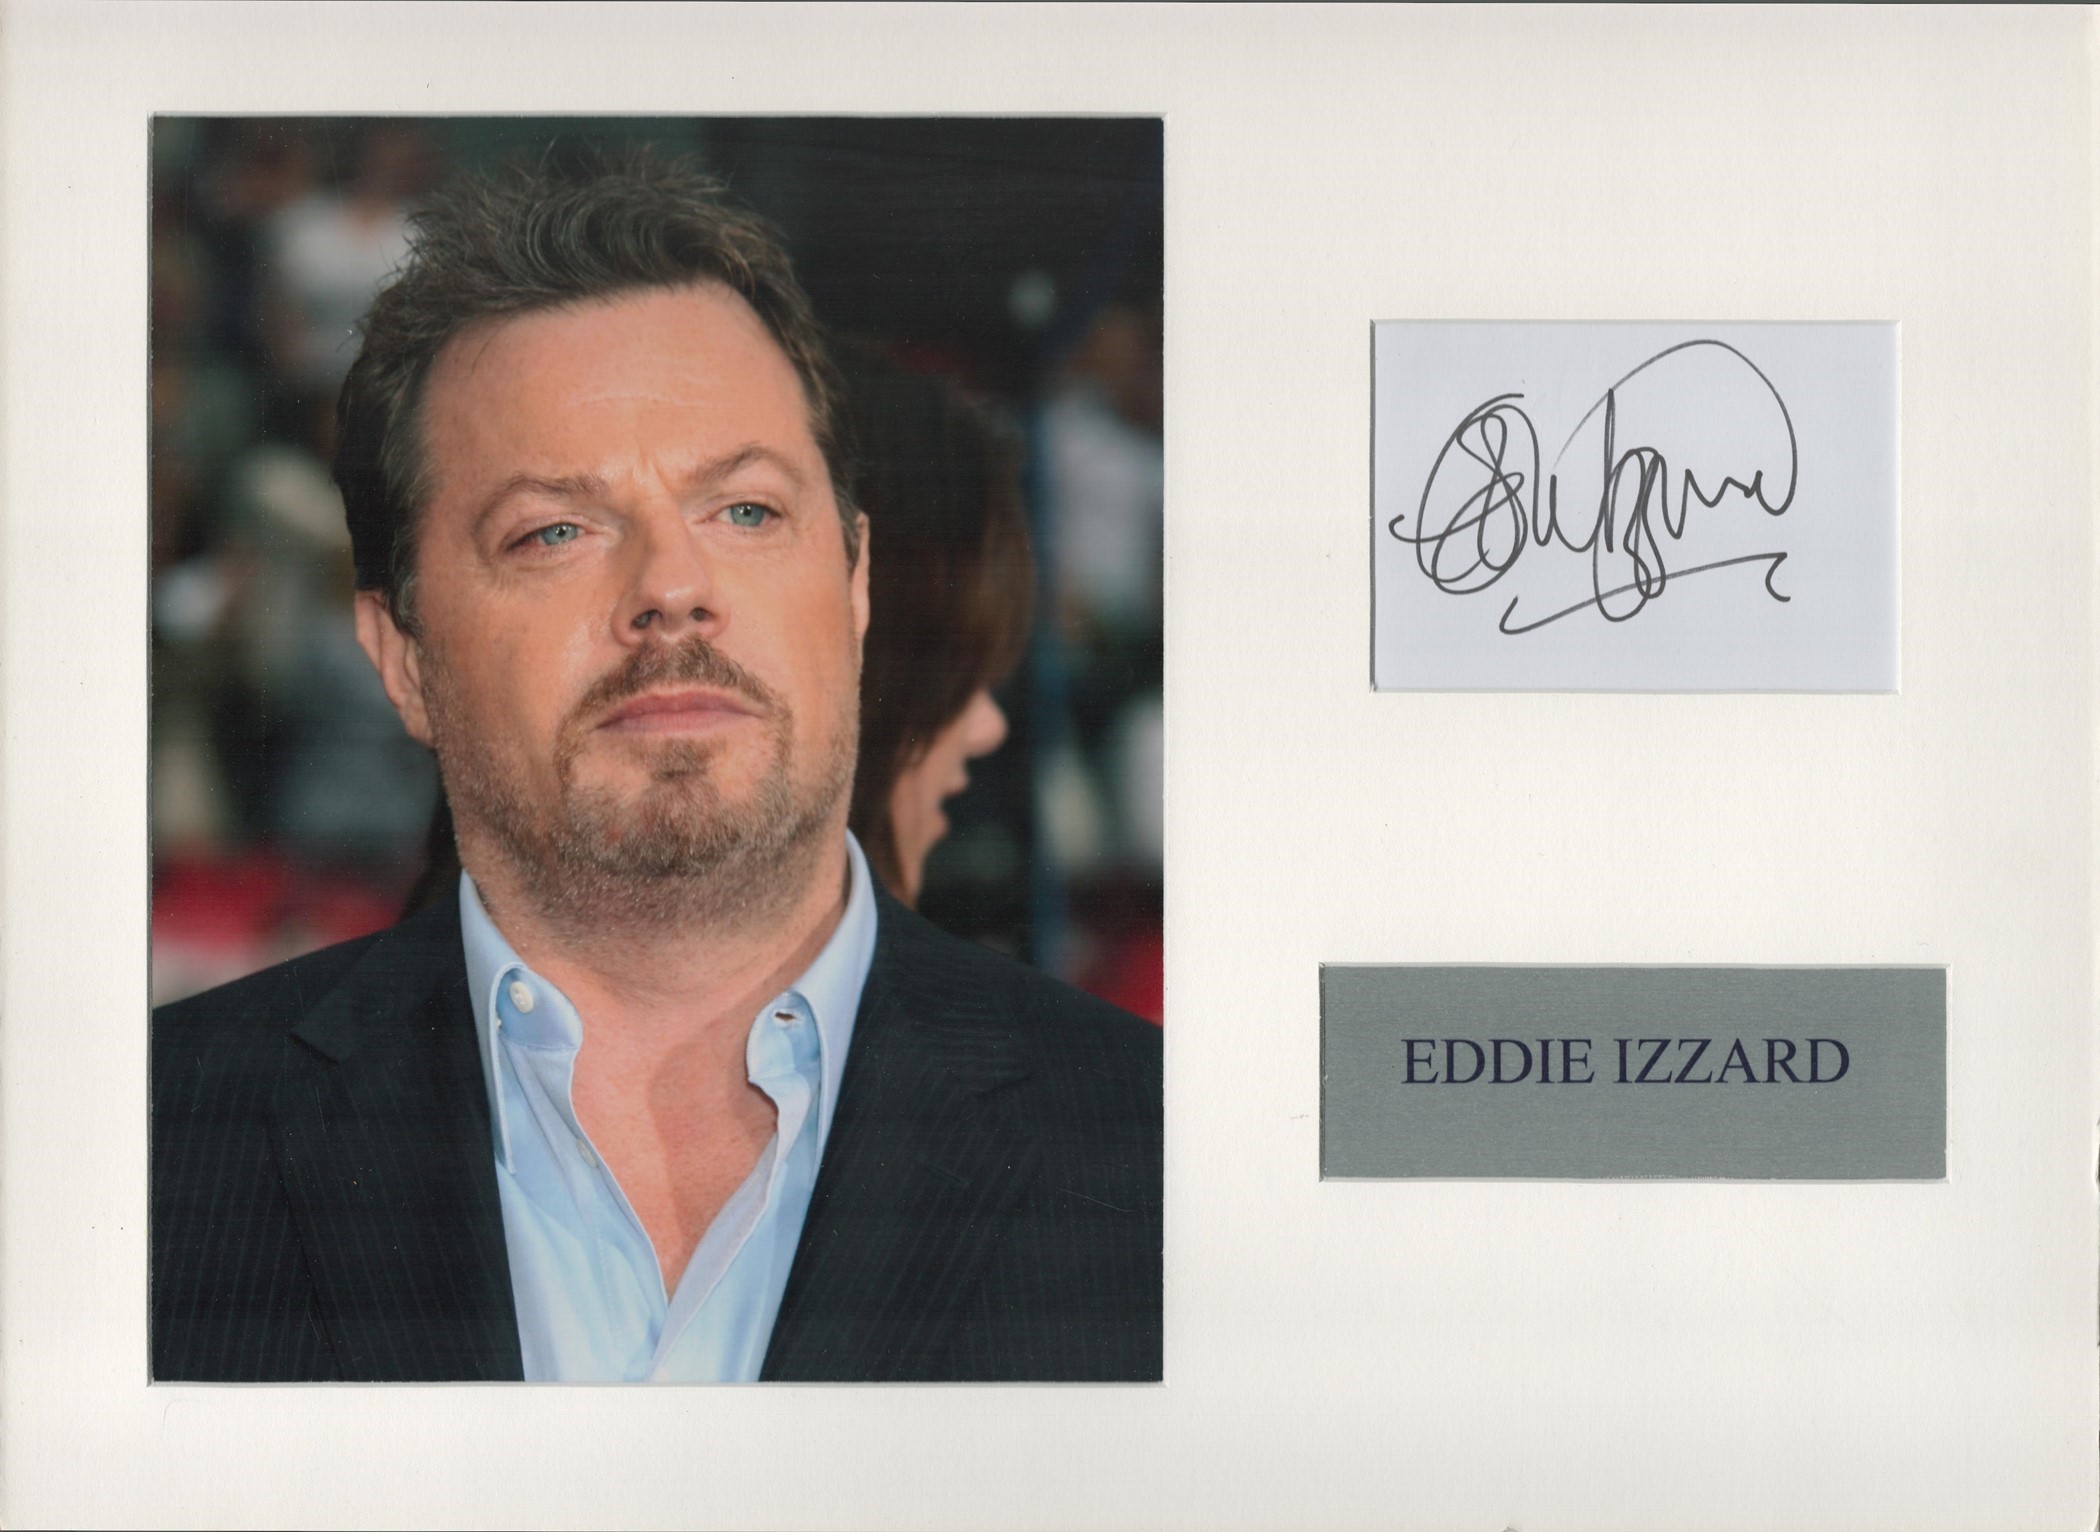 Eddie Izzard 16x12 inch mounted signature piece includes signed white card and colour photo. Good